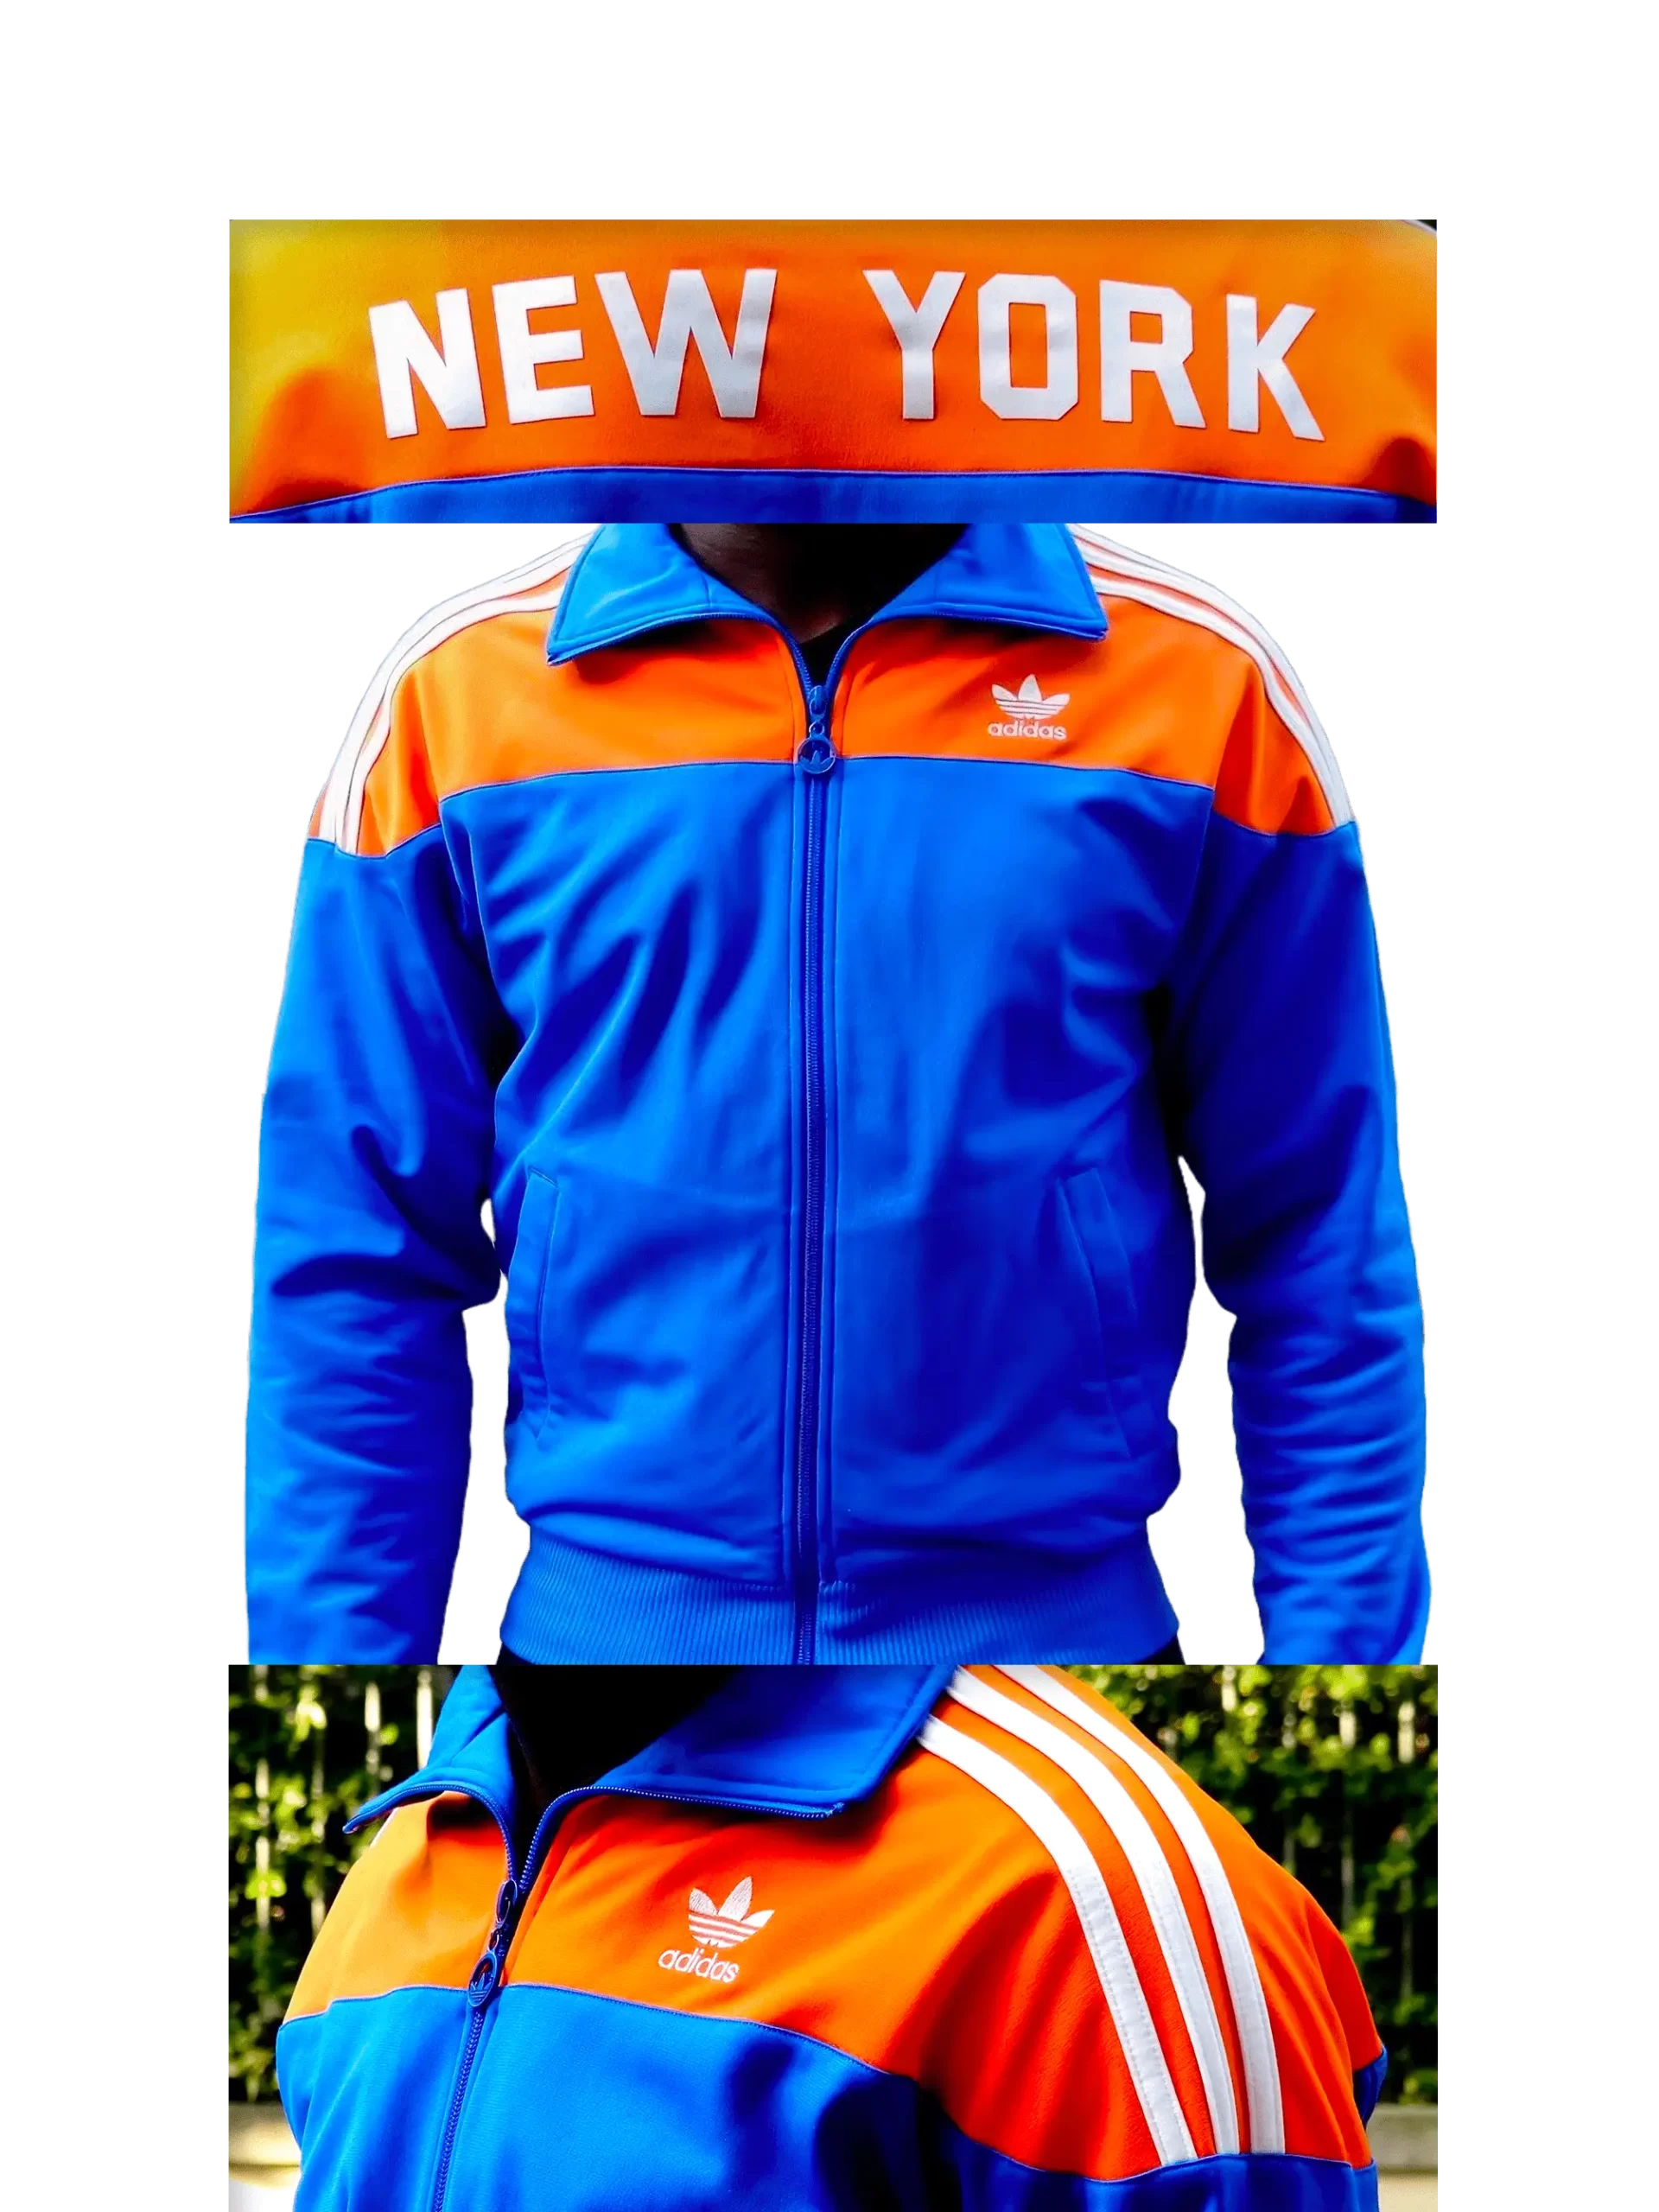 Men's 2005 New York State TT by Adidas Originals: Track Record (EnLawded.com file #lmchk79256ip2y124804kg9st)